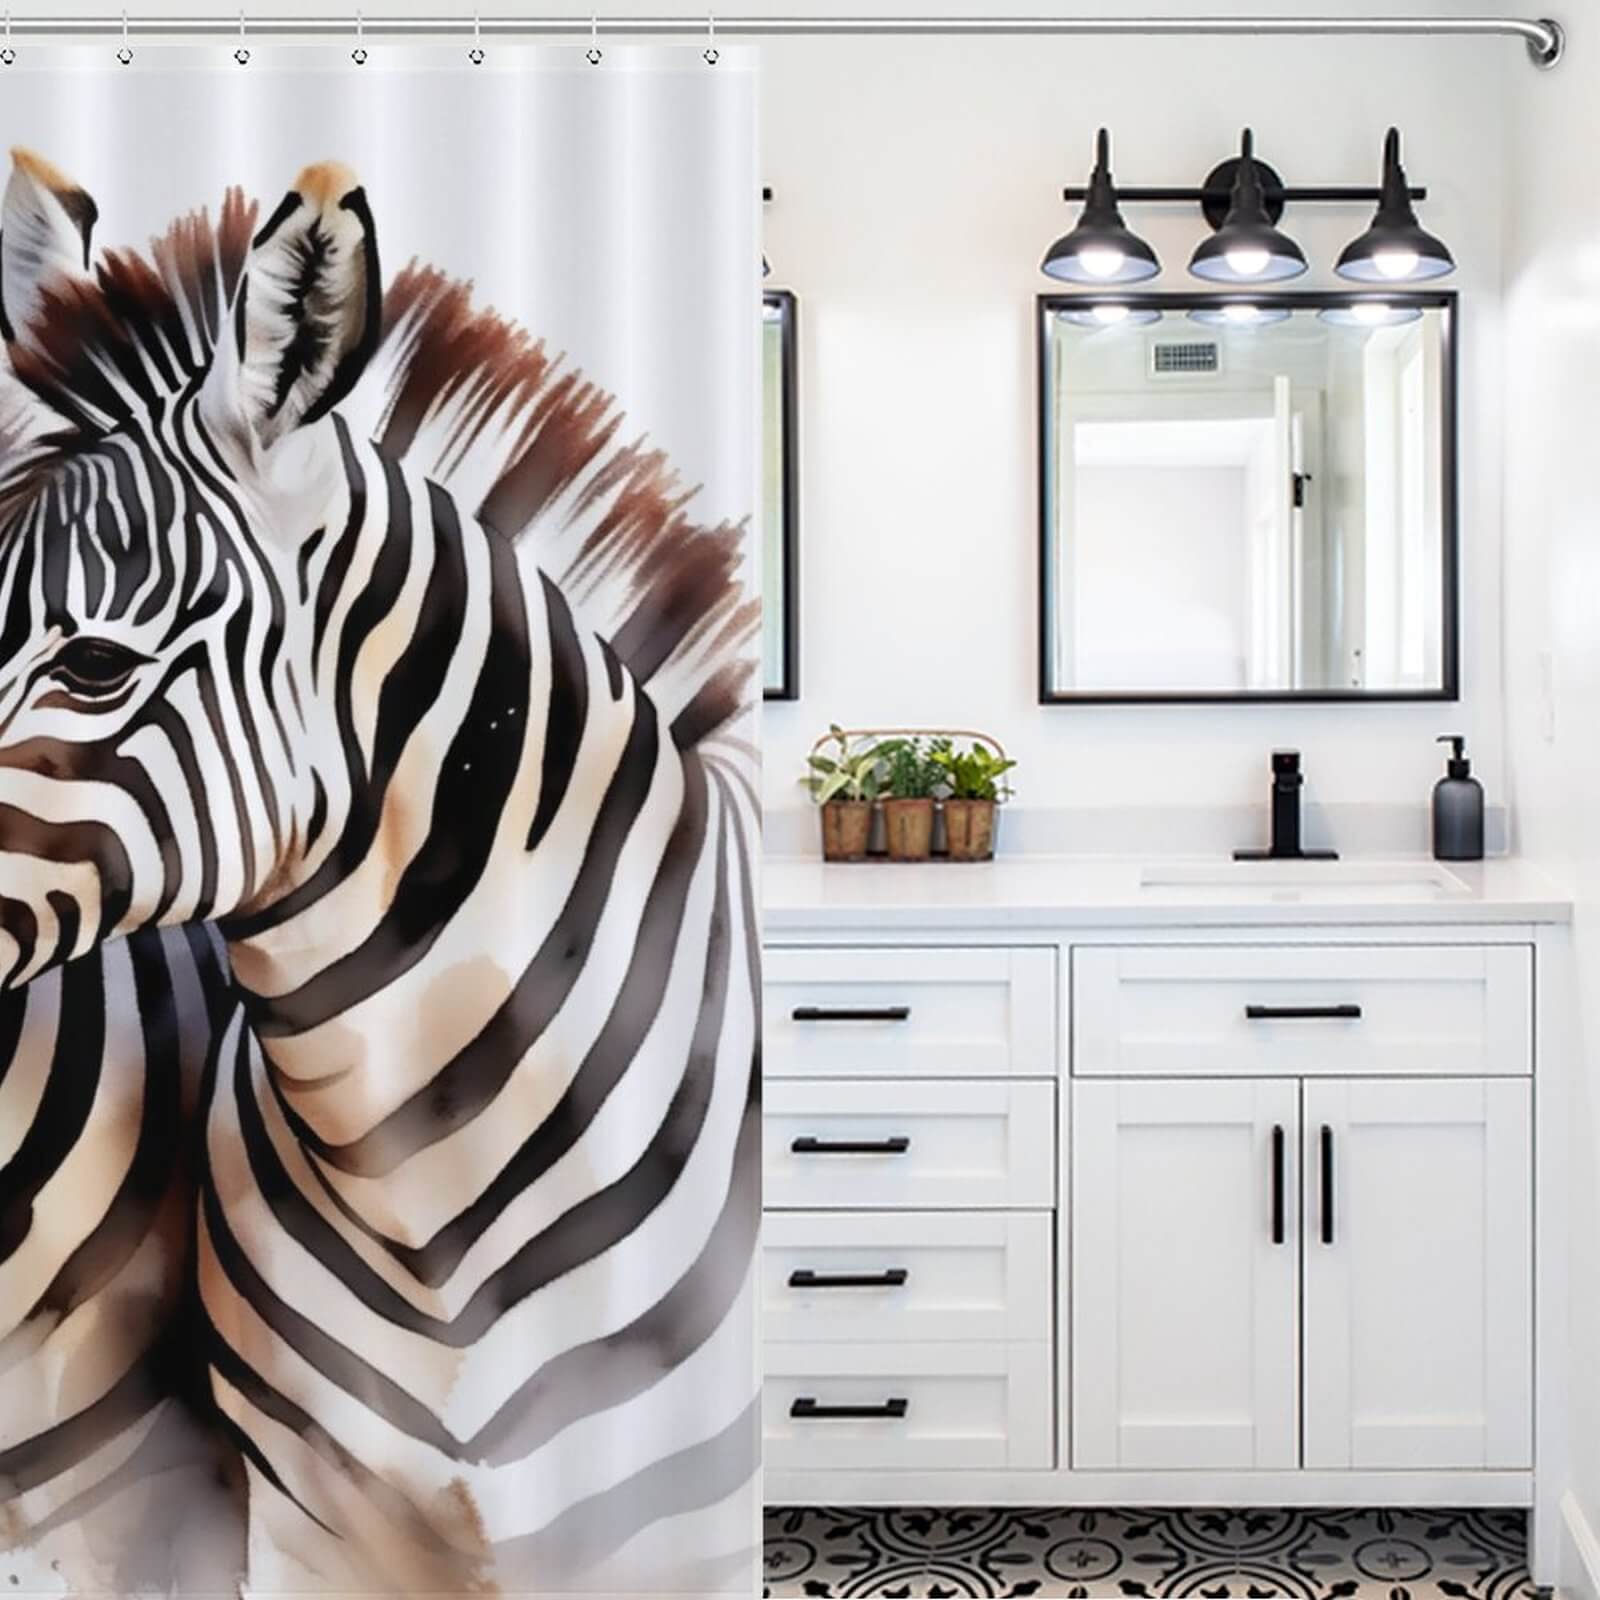 A waterproof bathroom with a Watercolor Zebra Shower Curtain-Cottoncat made of 100% Polyester.